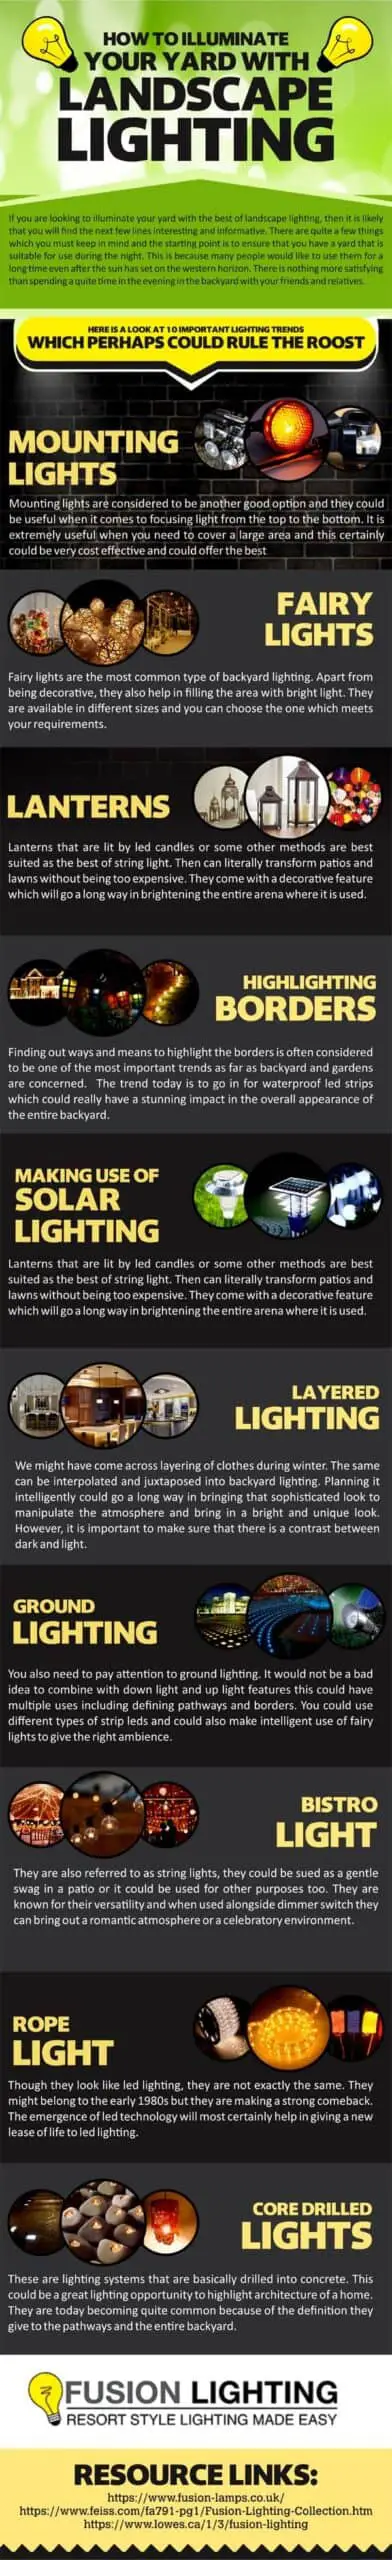 How To Illuminate Your Yard With Landscape Lighting 9 - Outdoor Lighting